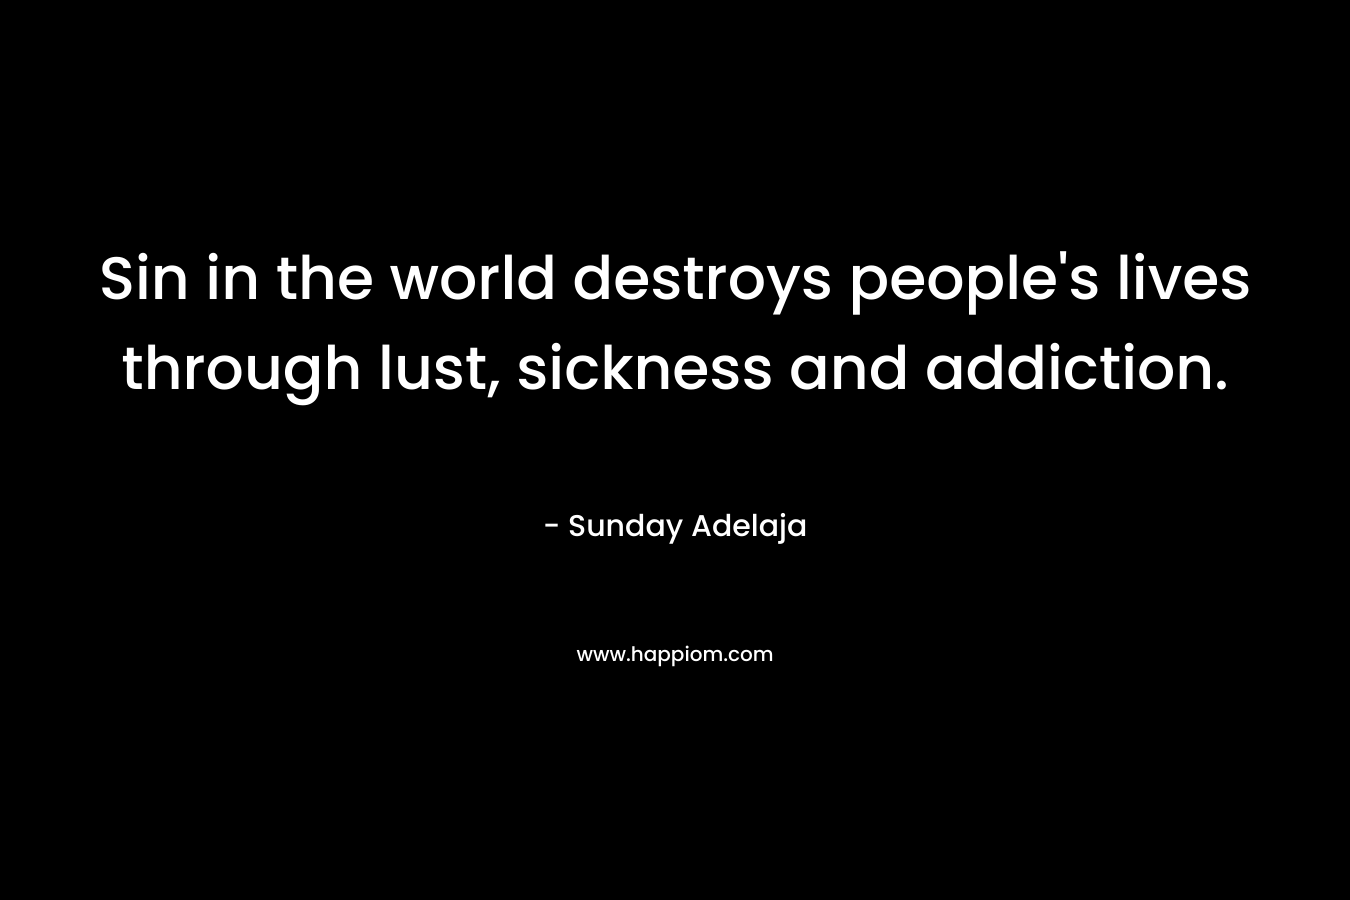 Sin in the world destroys people's lives through lust, sickness and addiction.